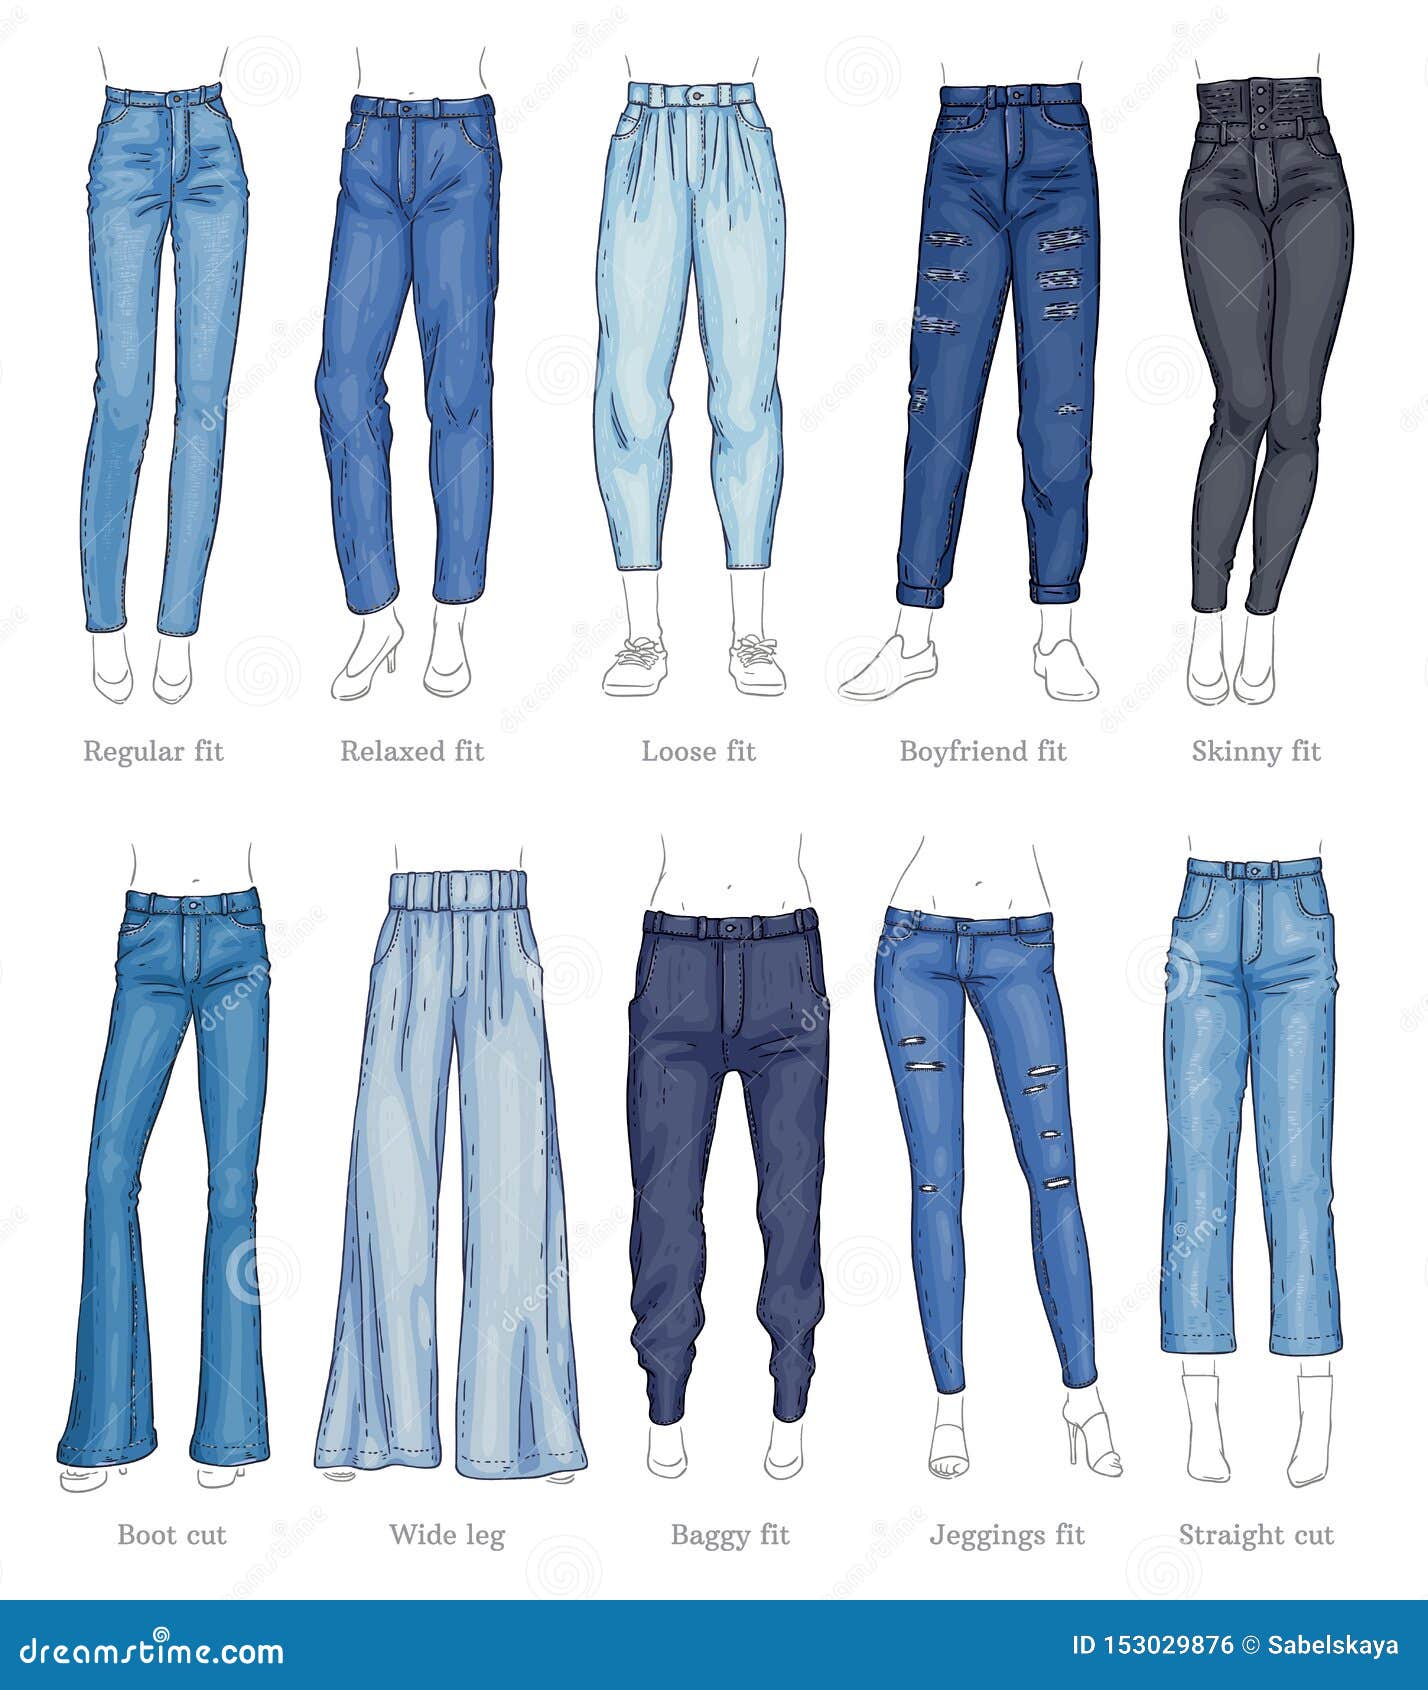 The Pant Guide for Short and Chubby Women - Petite Dressing